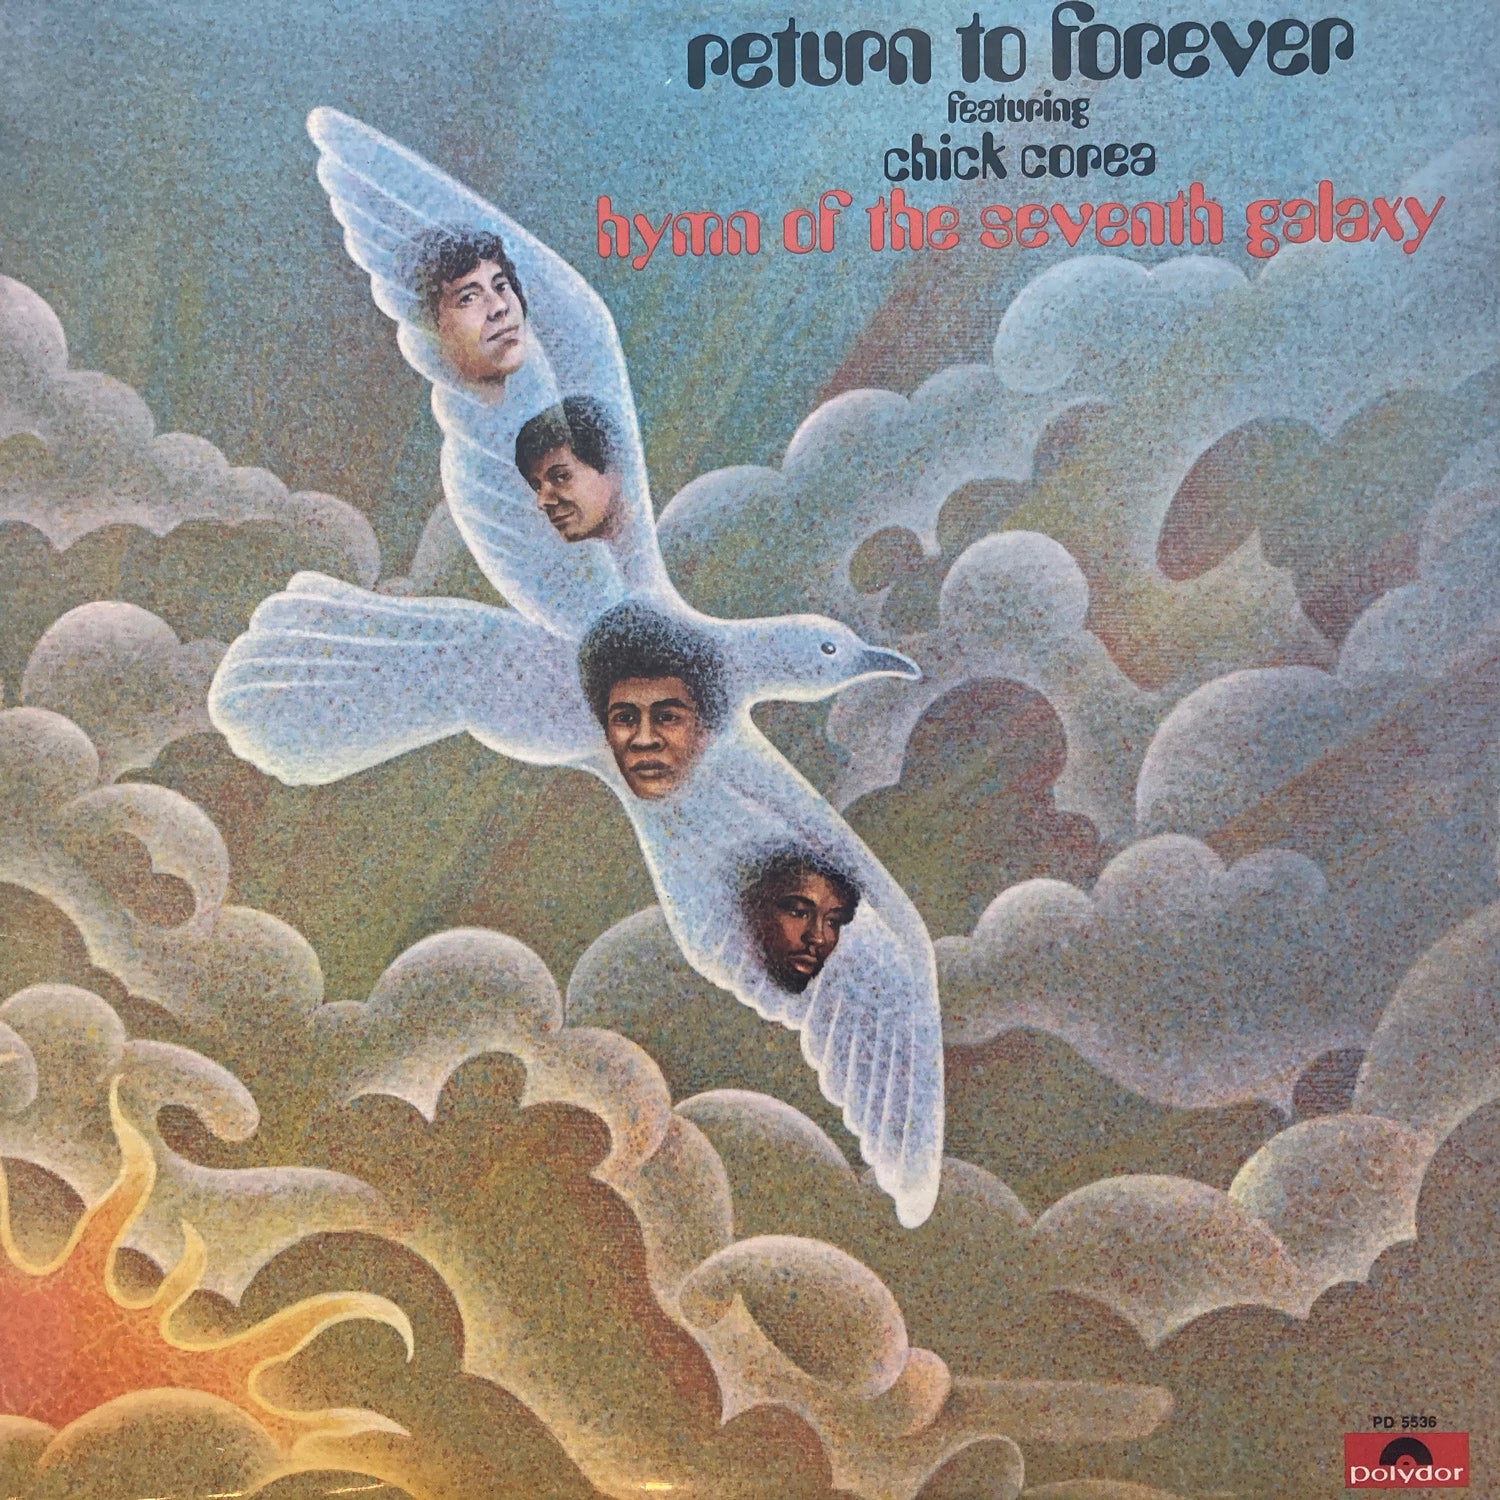 Return To Forever - Hymn of the Seventh Galaxy